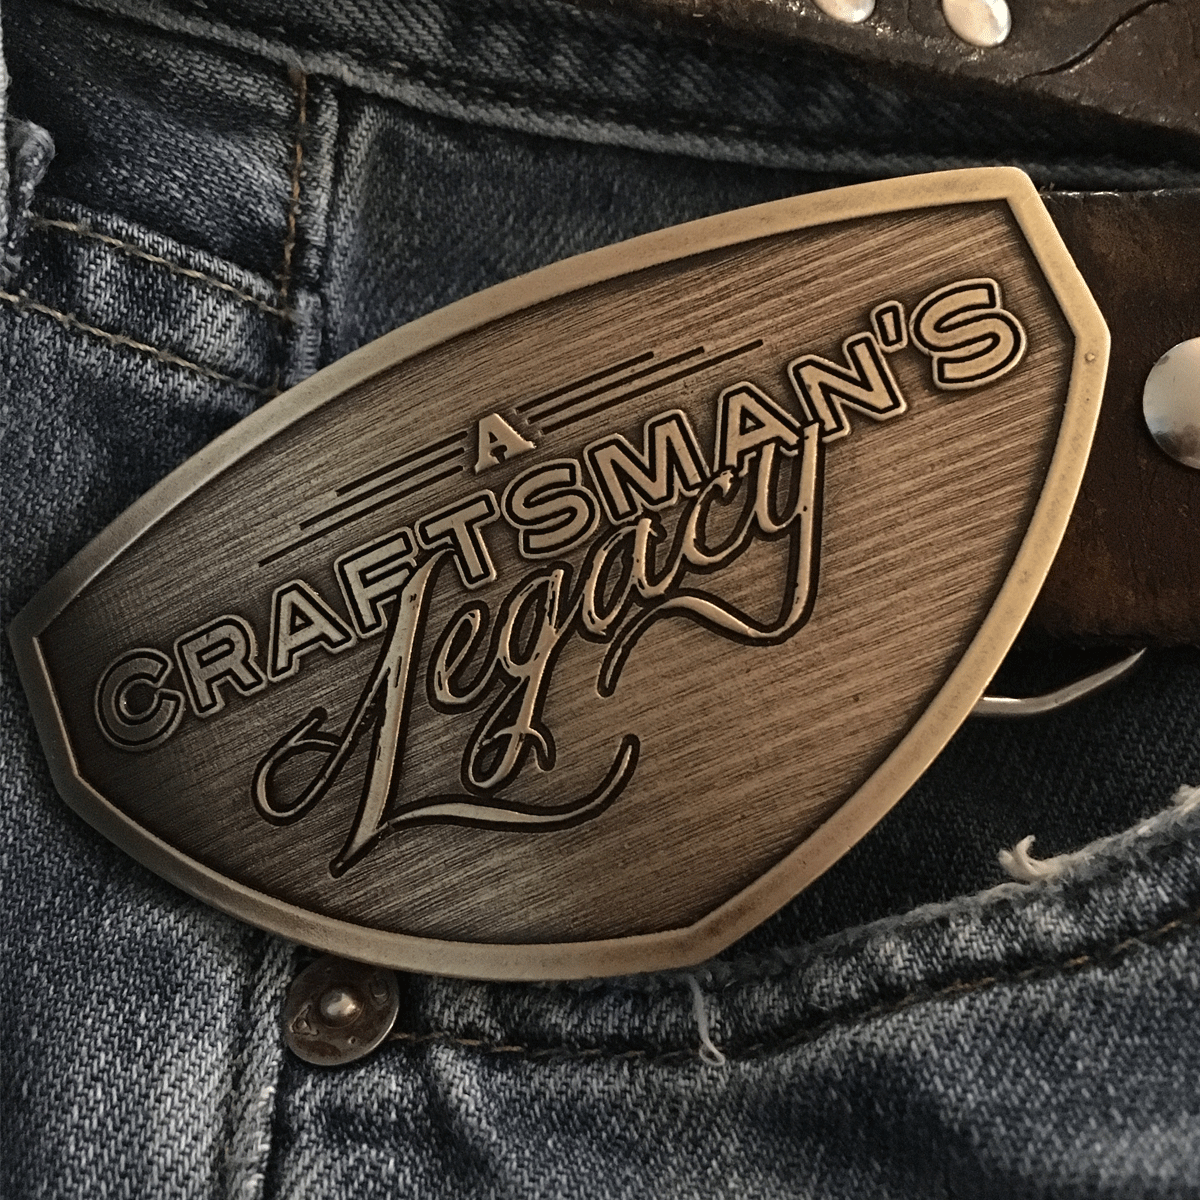 A Craftsman's Legacy, Buckle